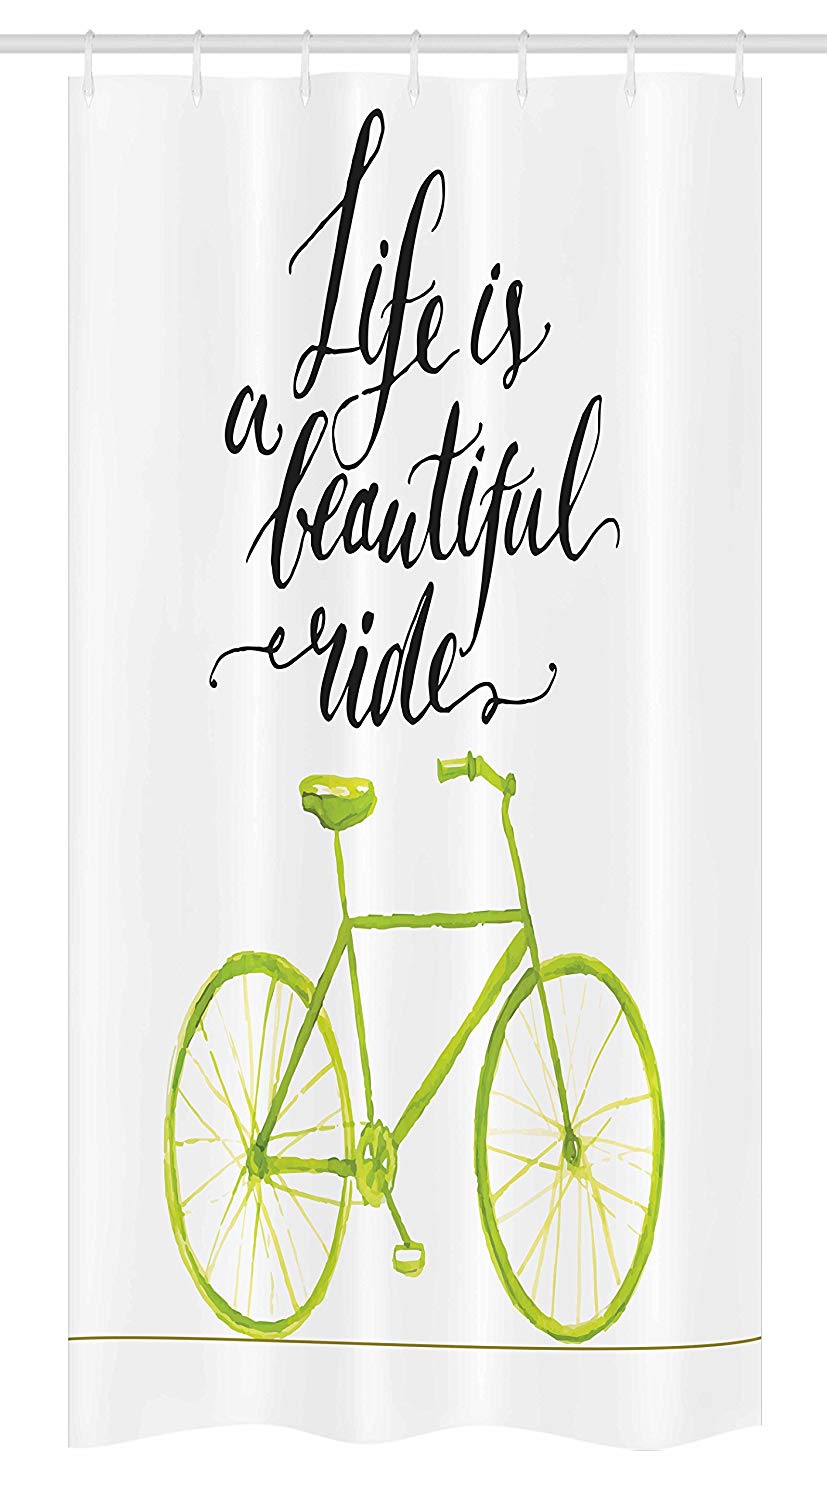 Ambesonne Bicycle Stall Shower Curtain, Life is a Bike Ride Words Print with Pastel Color Unique Bike Graphic, Fabric Bathroom Decor Set with Hooks, 36